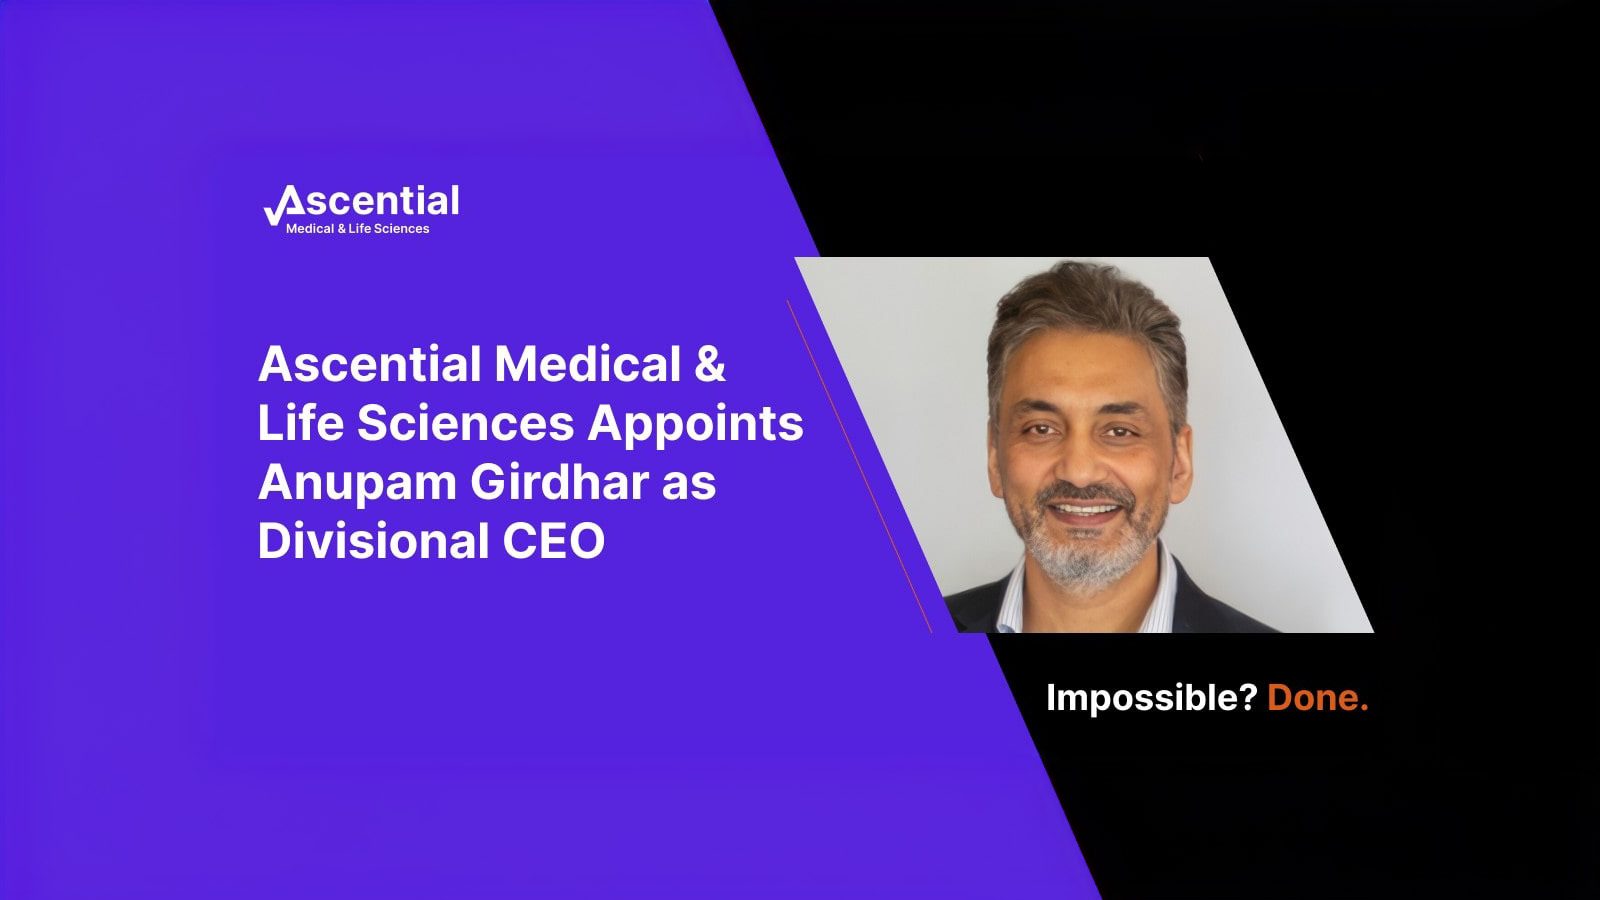 Ascential Medical & Life Sciences Appoints Anupam Girdhar as Divisional CEO 